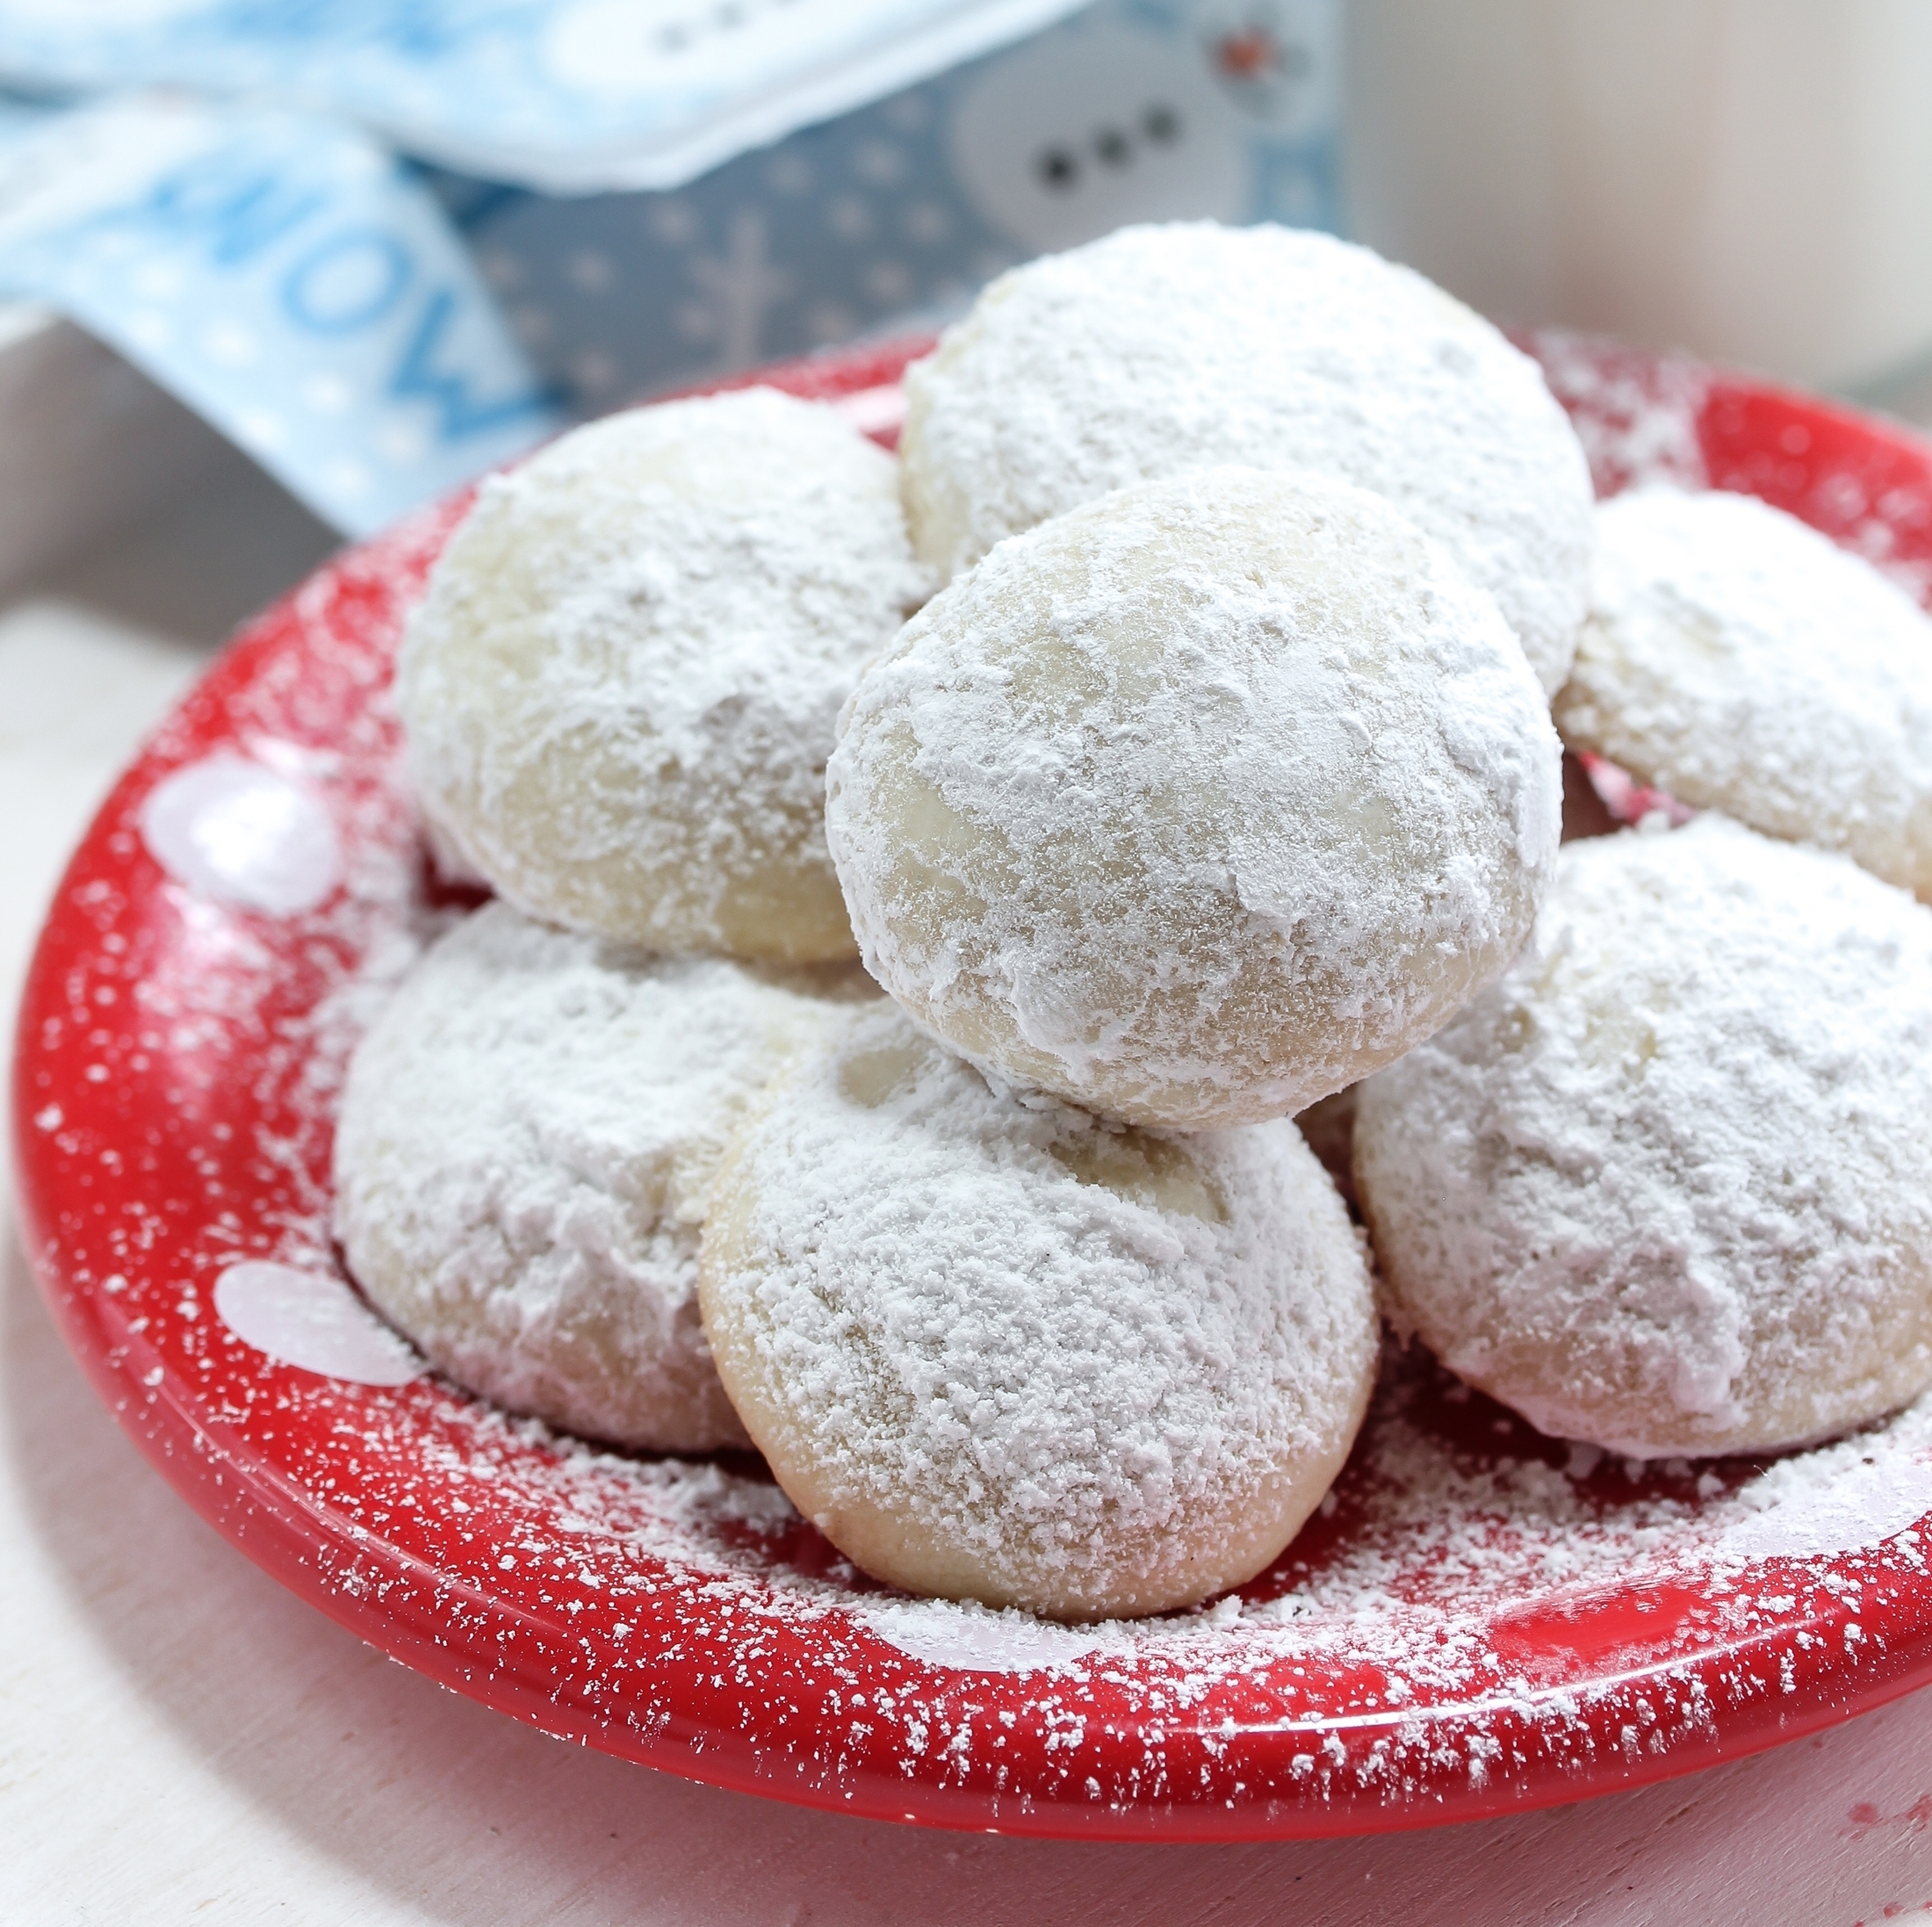 Mexican Wedding Cookies Recipe (with Almonds) Cooking The Globe